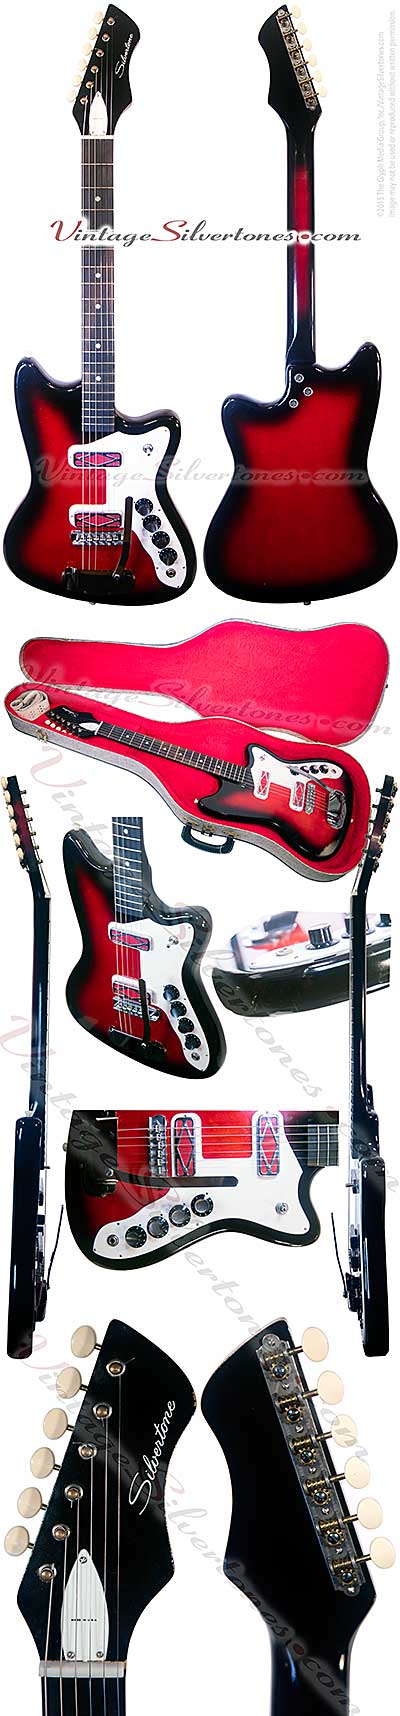 Silvertone -Harmony-made - 1479 solid body electric guitar with 1750 whammy bar double cutaway, redburst, 2 red pickups made 1967